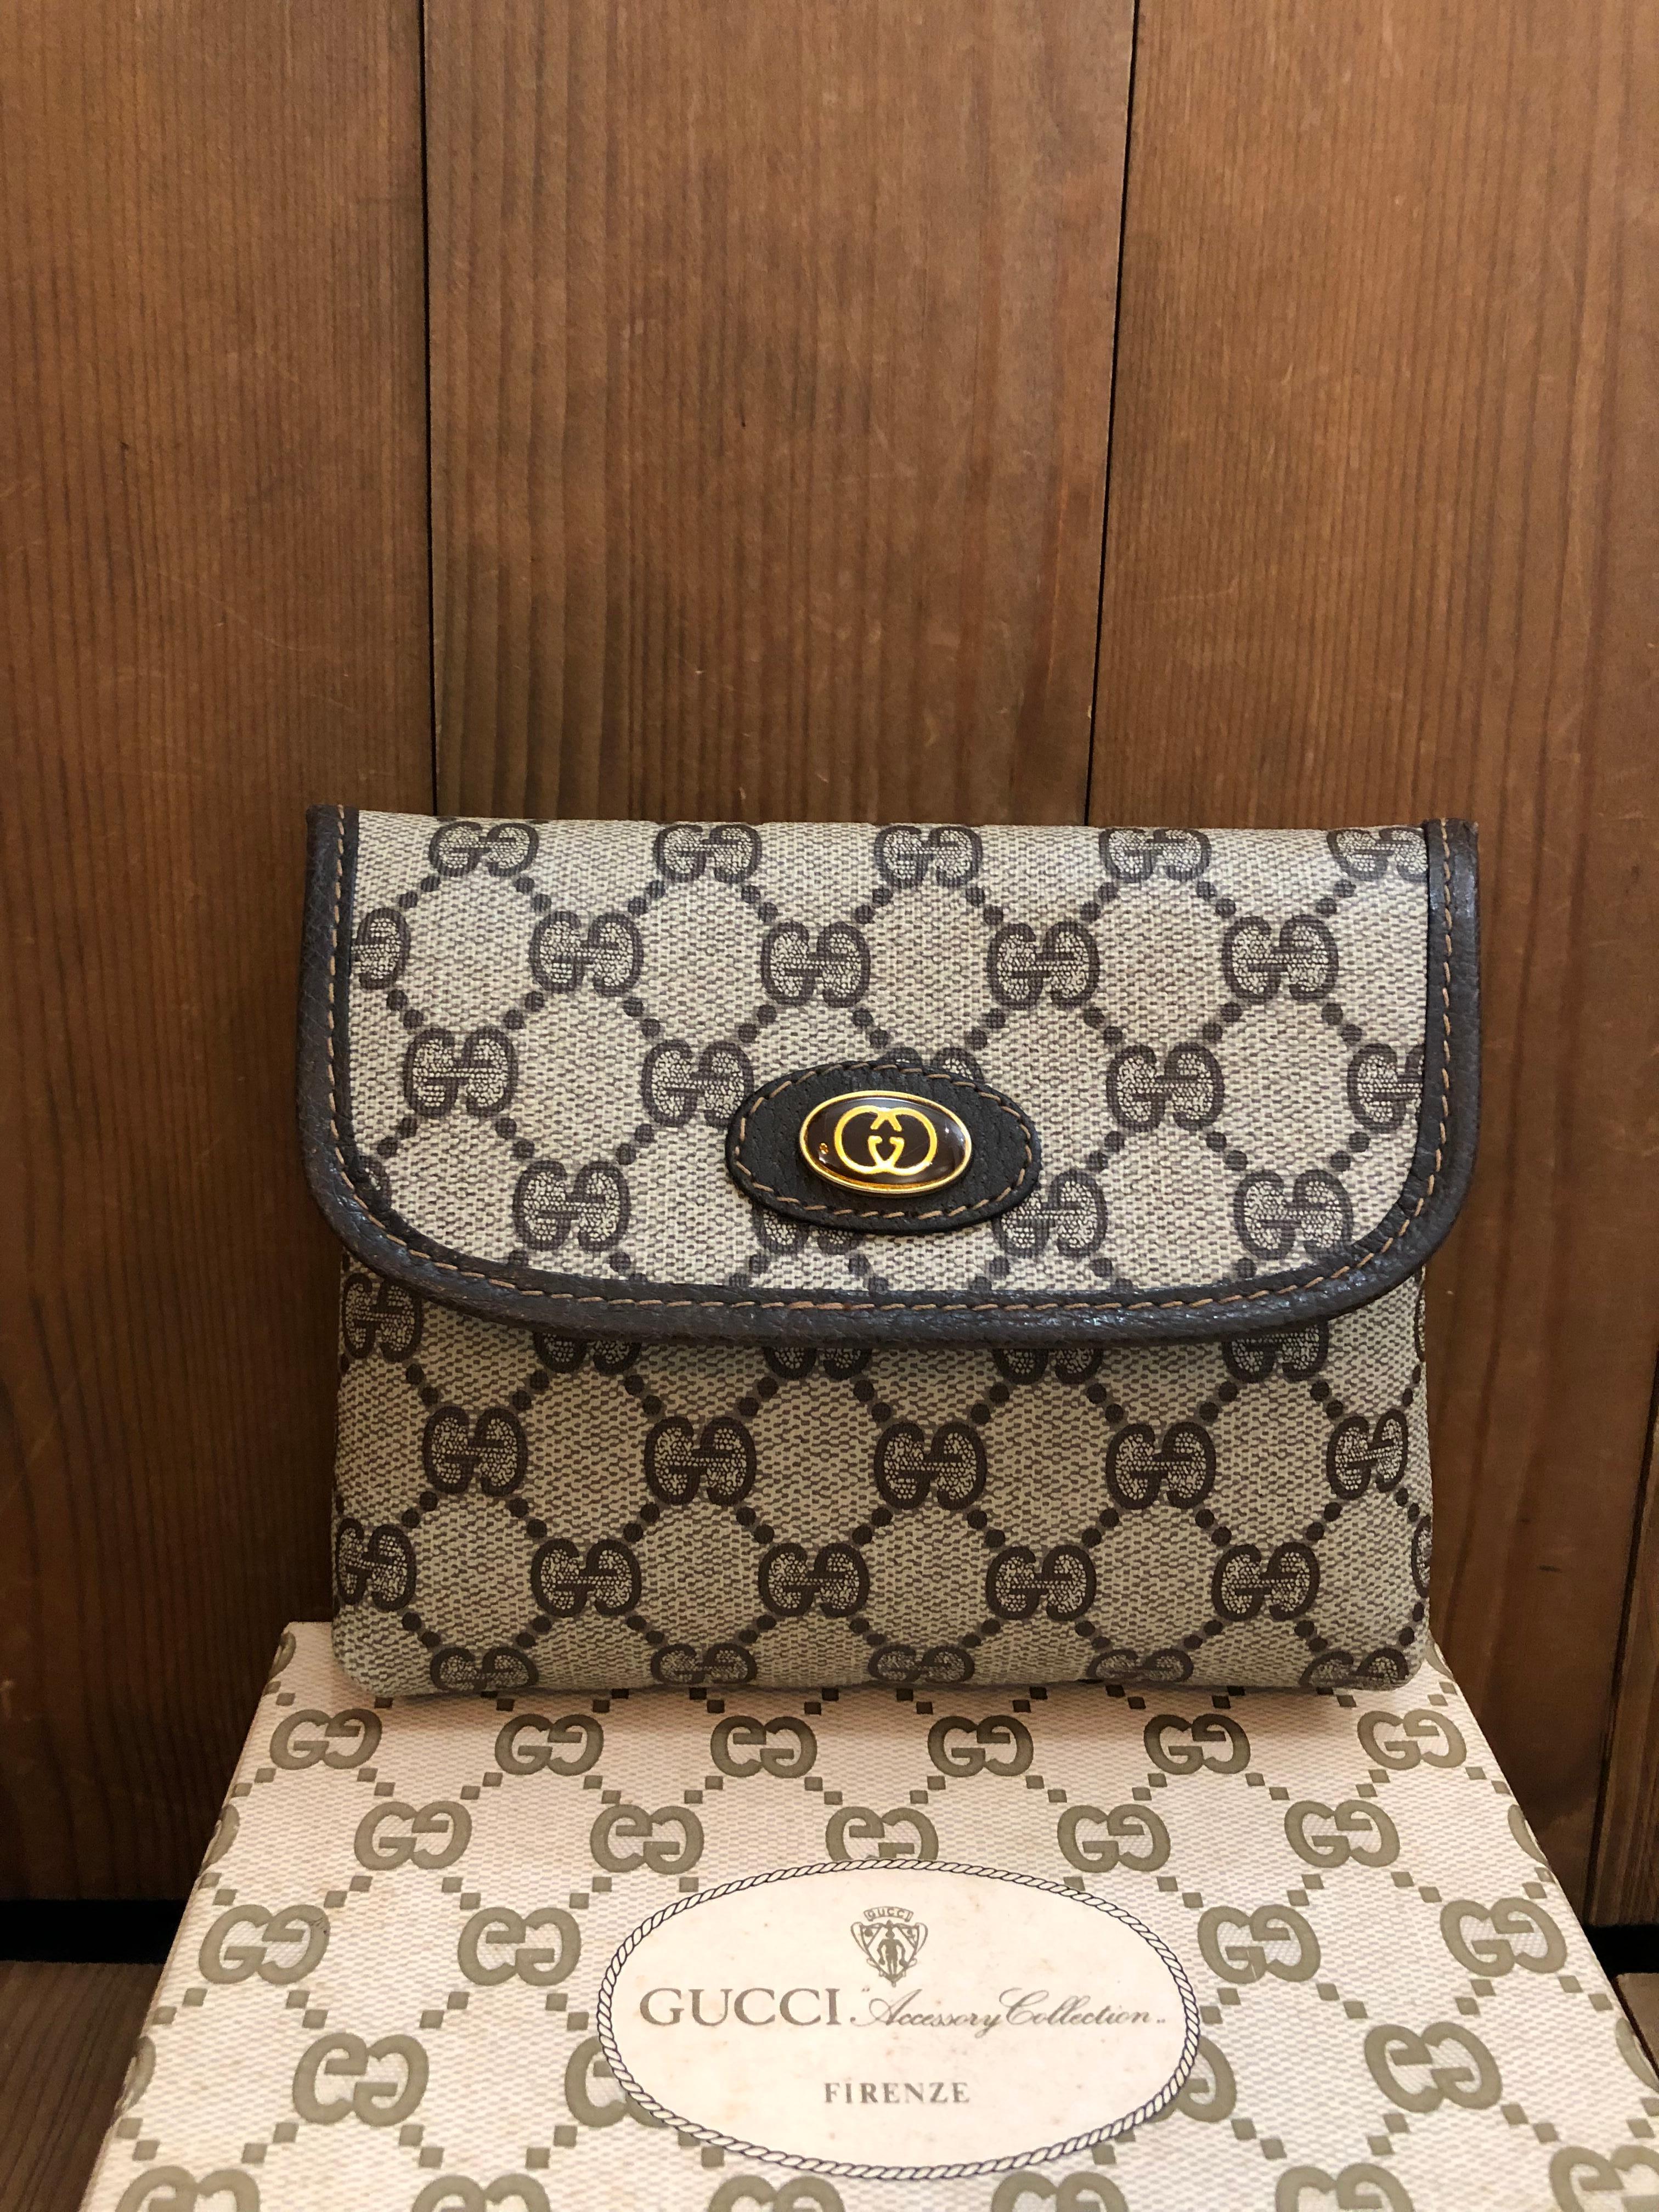 This vintage GUCCI pouch bag is crafted of GG monogram canvas in brown trimmed with brown leather. Front snap closure open to a laminated monogram interior. Made in Italy. Measures 5.75 x 5 x 1.5 inches. Comes with box.

Condition - Excellent